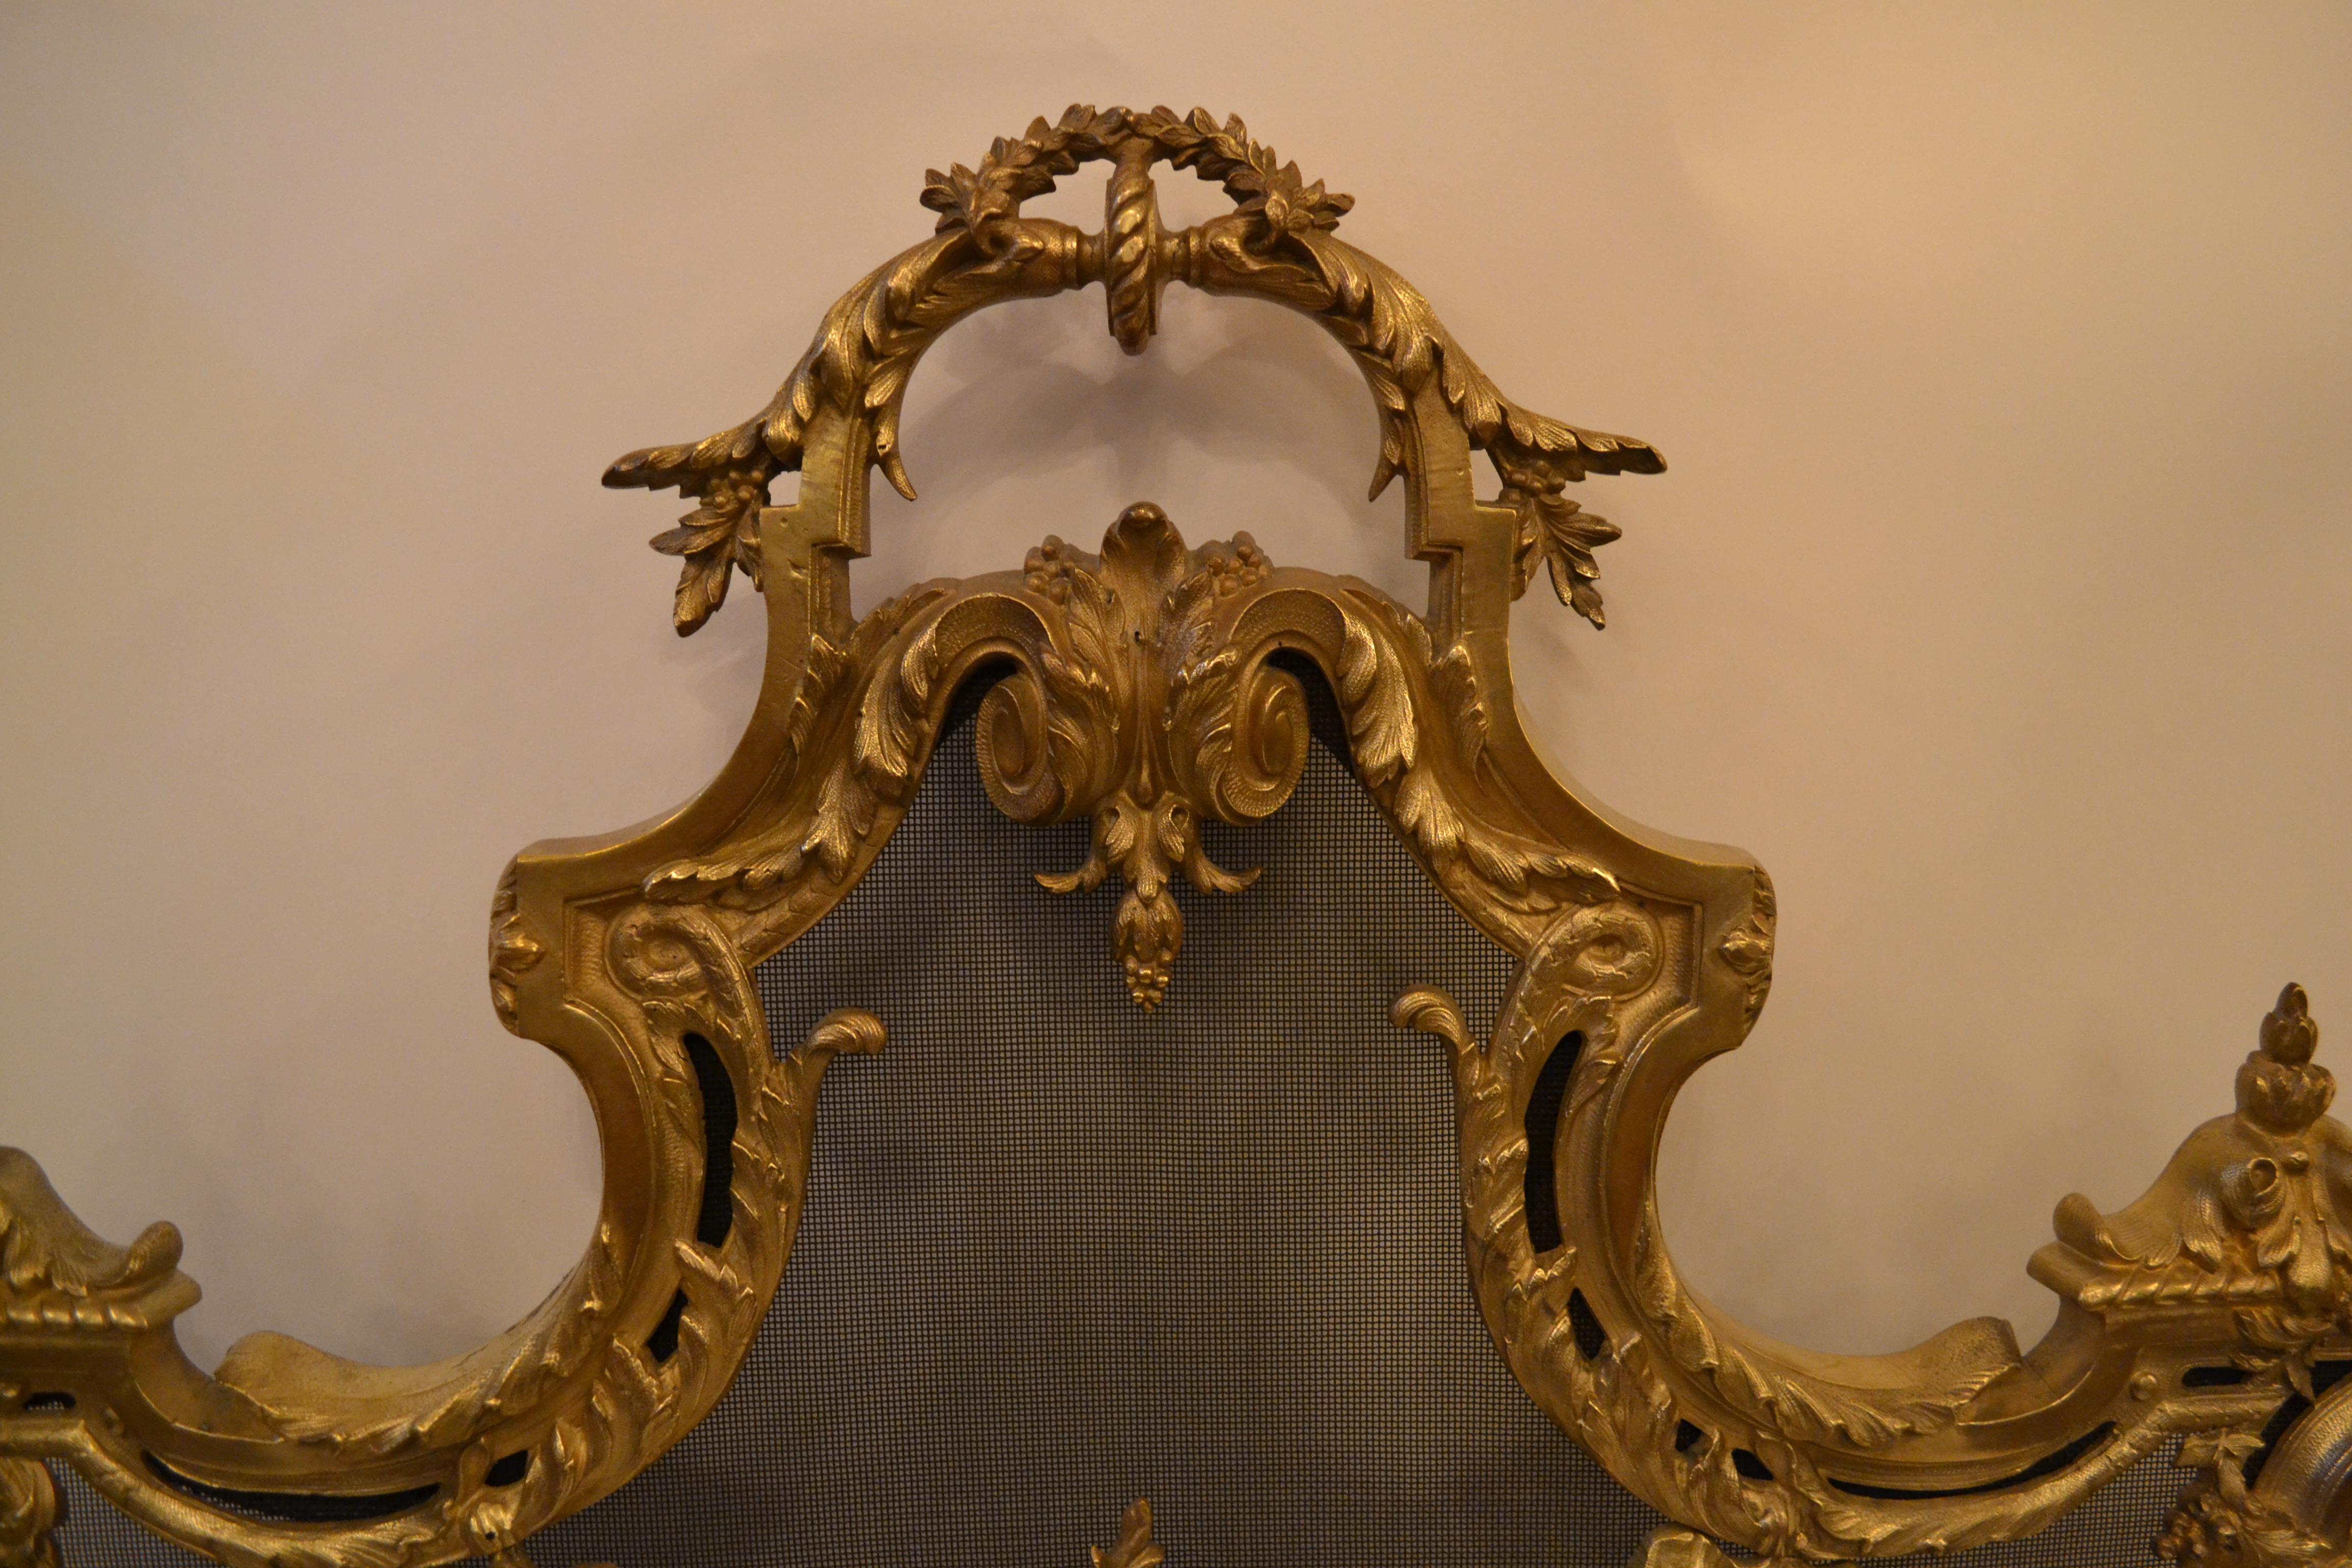 A firescreen worthy of the Louis XV style, and sure to please.